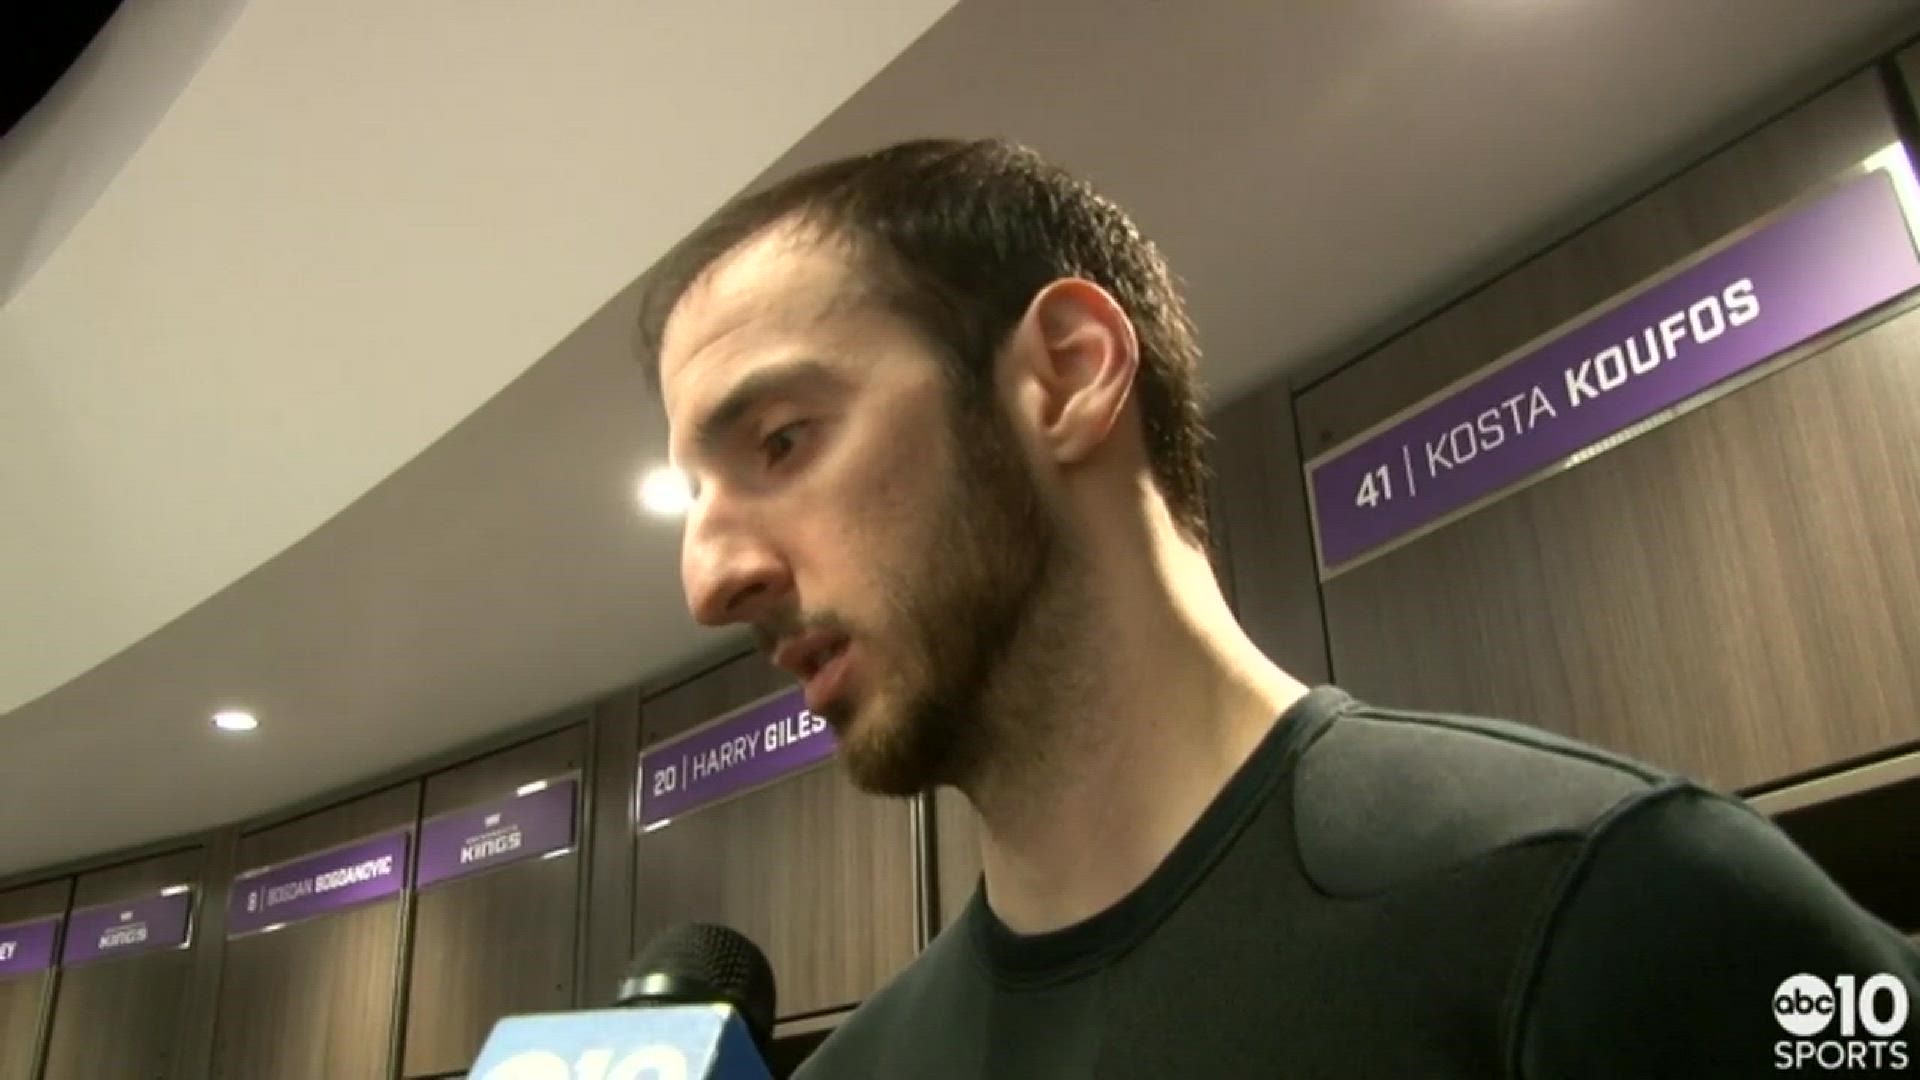 Kosta Koufos talks about the Kings victory in Sacramento over the Orlando Magic, the 200th win for his head coach Dave Joerger and the contribution from his teammates.